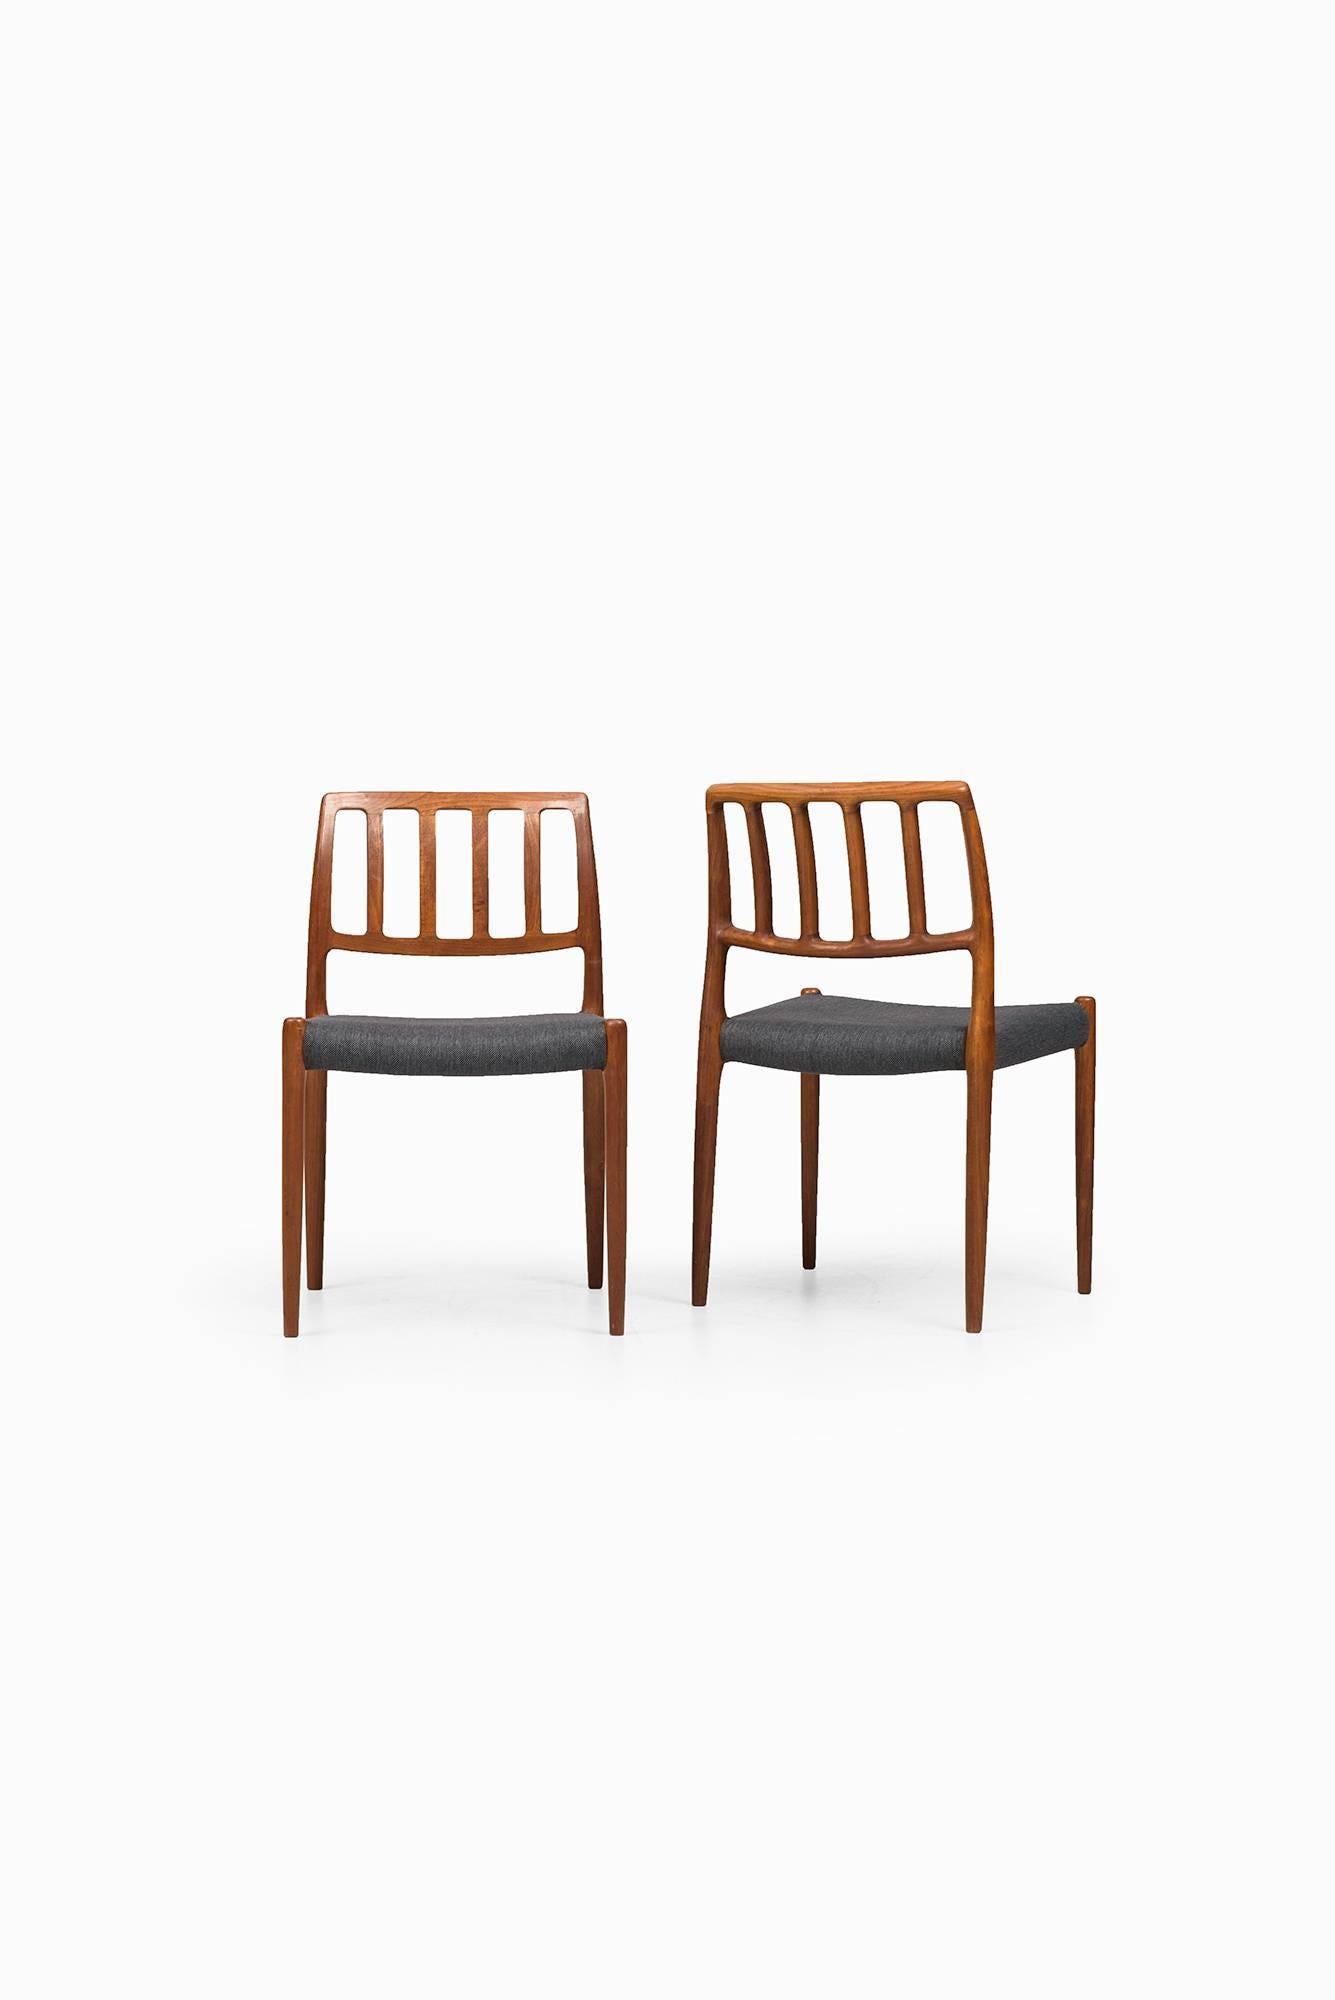 Rare set of six dining chairs model 83 designed by Niels O. Møller. Produced by J.L Møllers Møbelfabrik in Denmark.